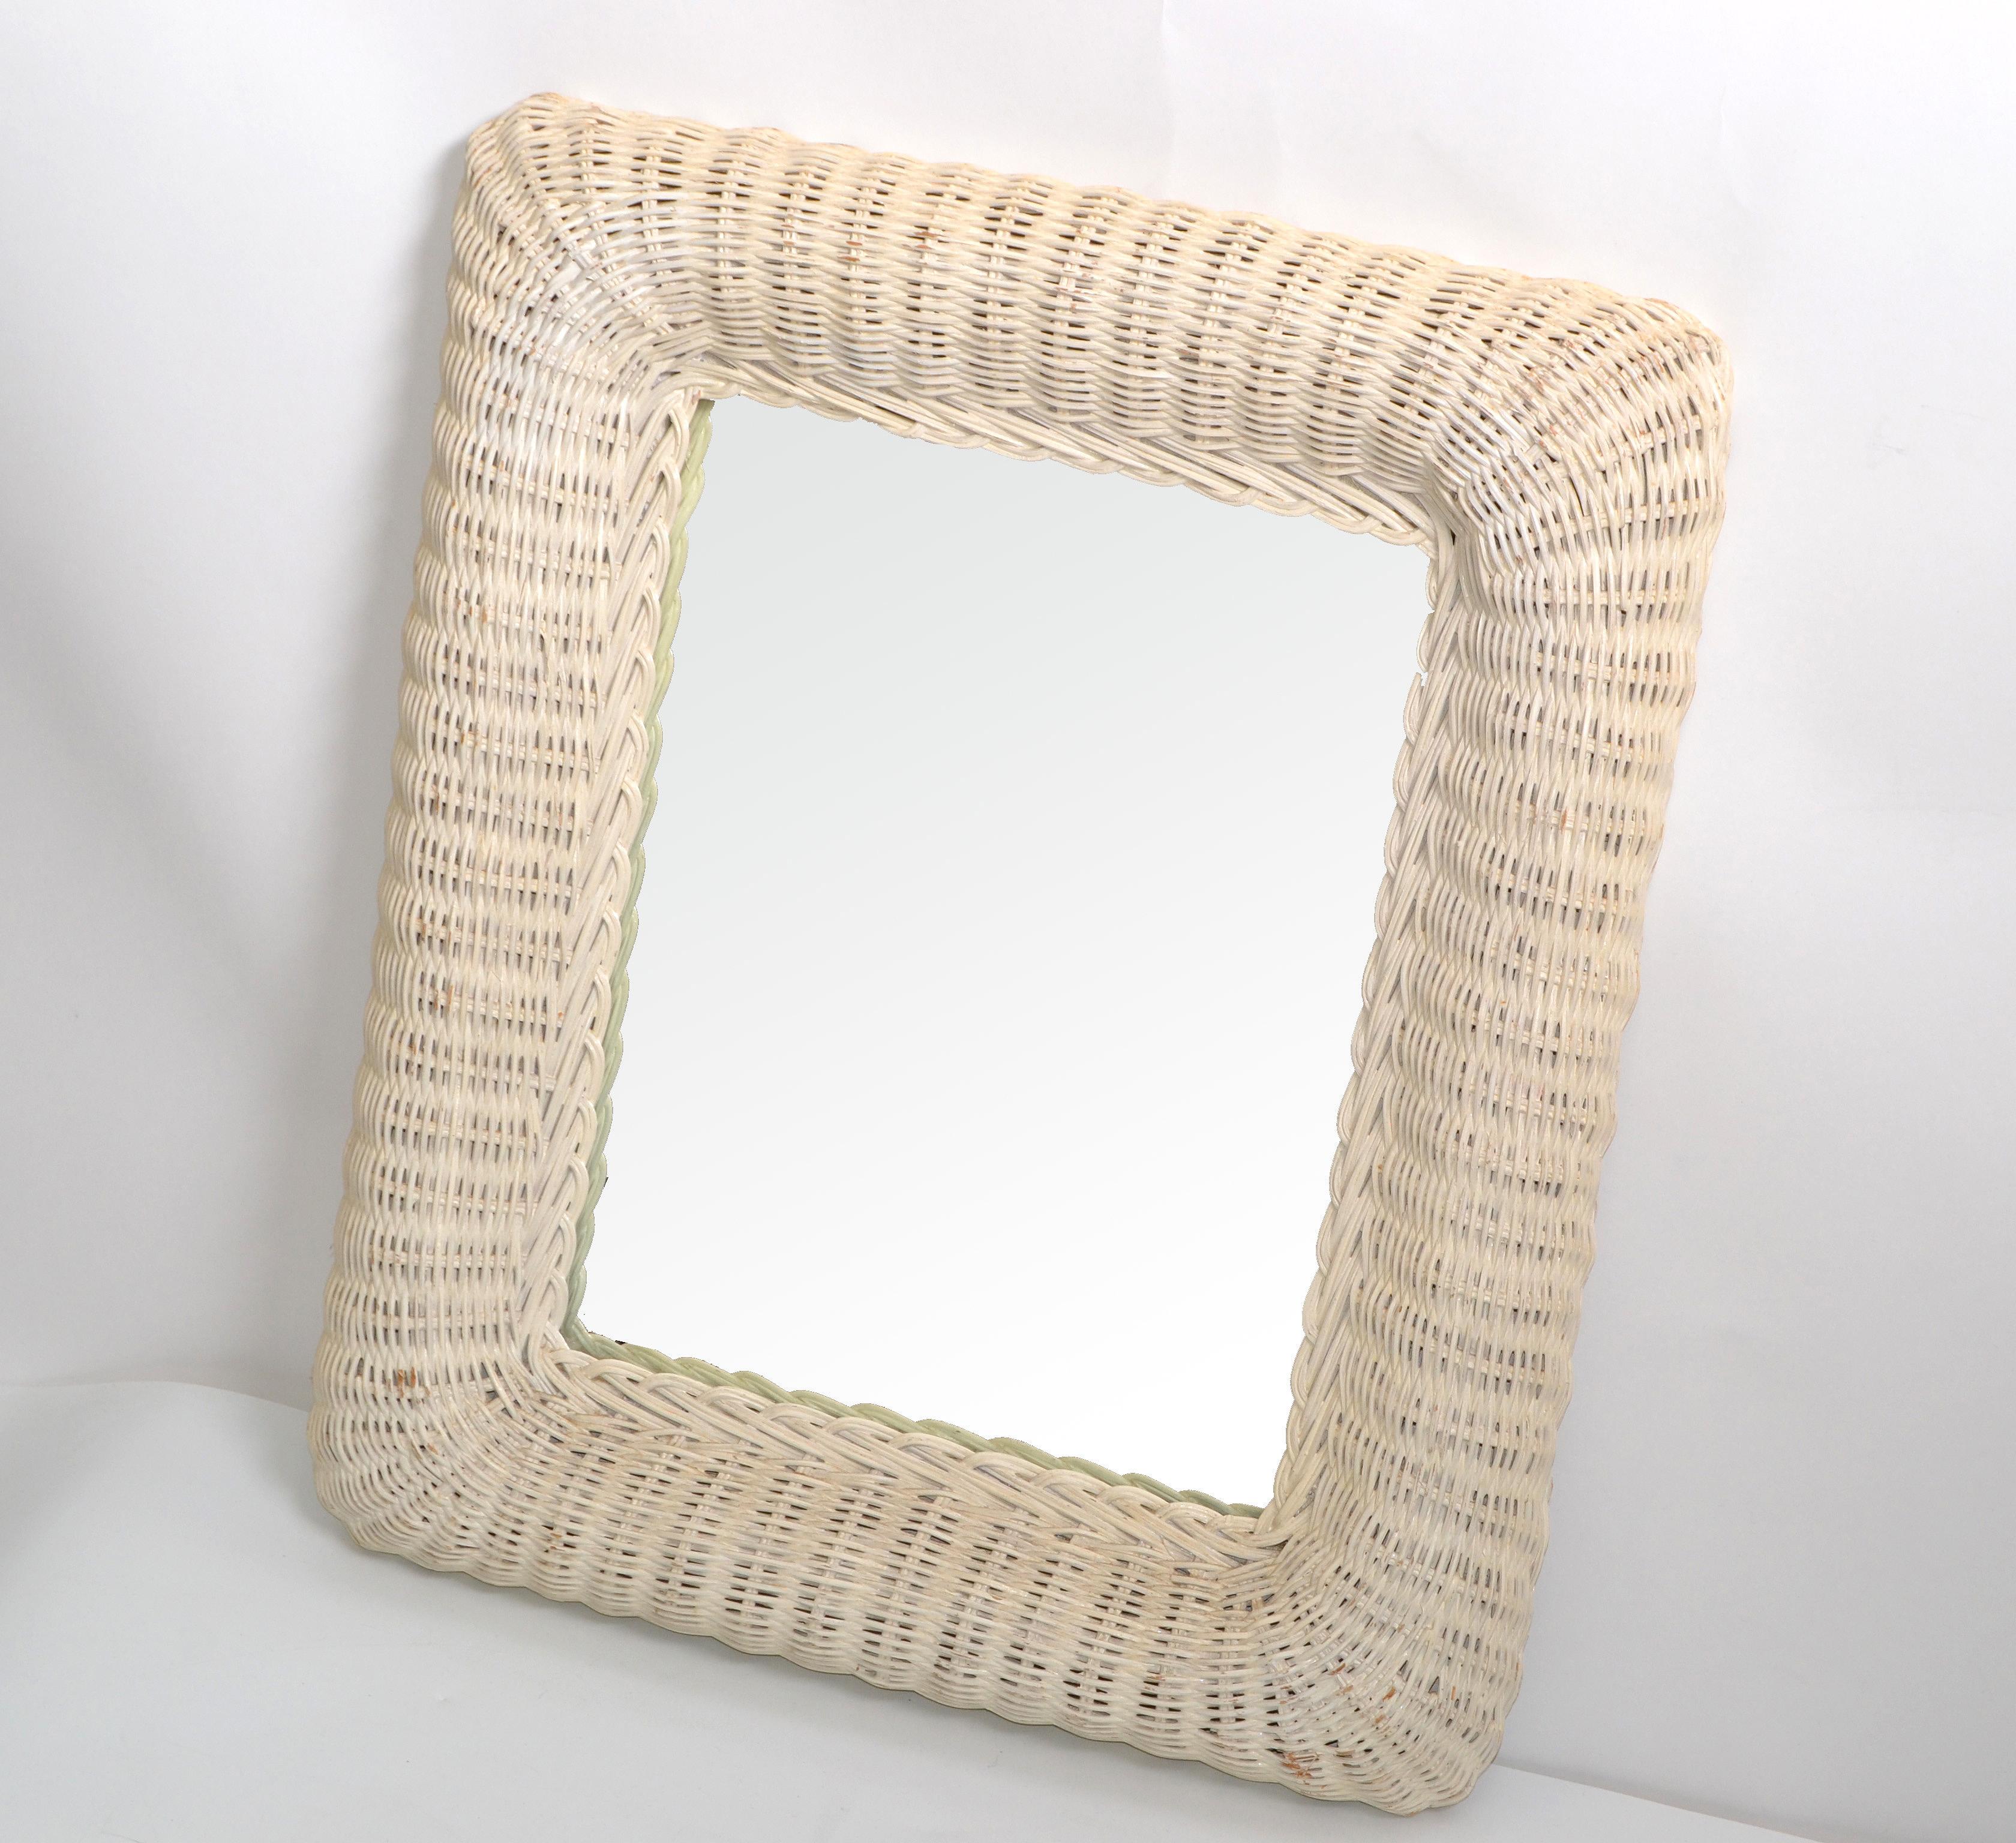 Mid-Century Modern rectangular handmade white finished wicker & wood wall mirror.
The mirror is woven with rattan and has wooden backing.
Mirror size: 10.25 x 13.25 inches.
Bohemian Chic addition for the sunroom.